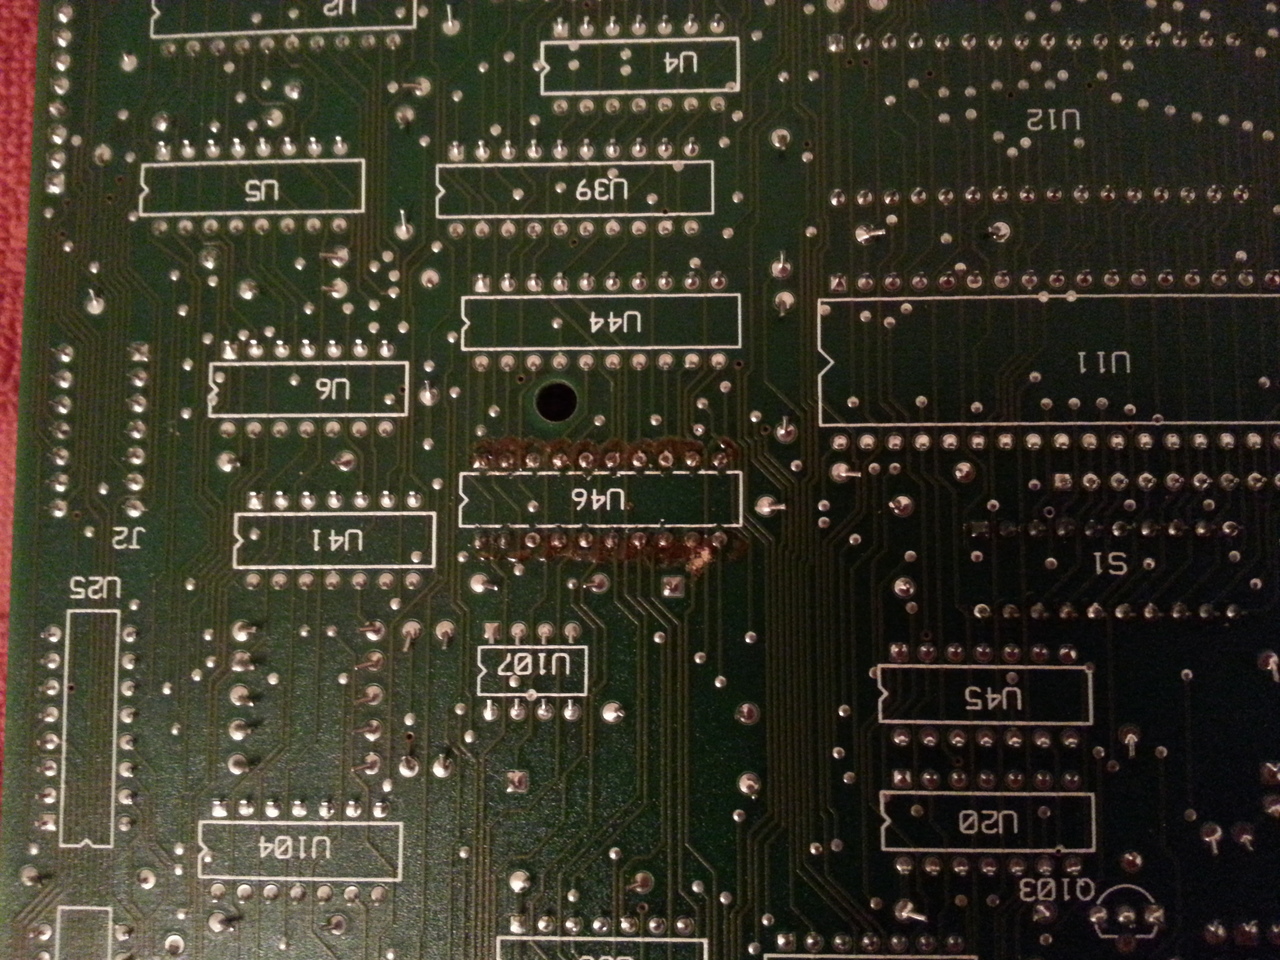 The U46 chip seems to have been replaced.